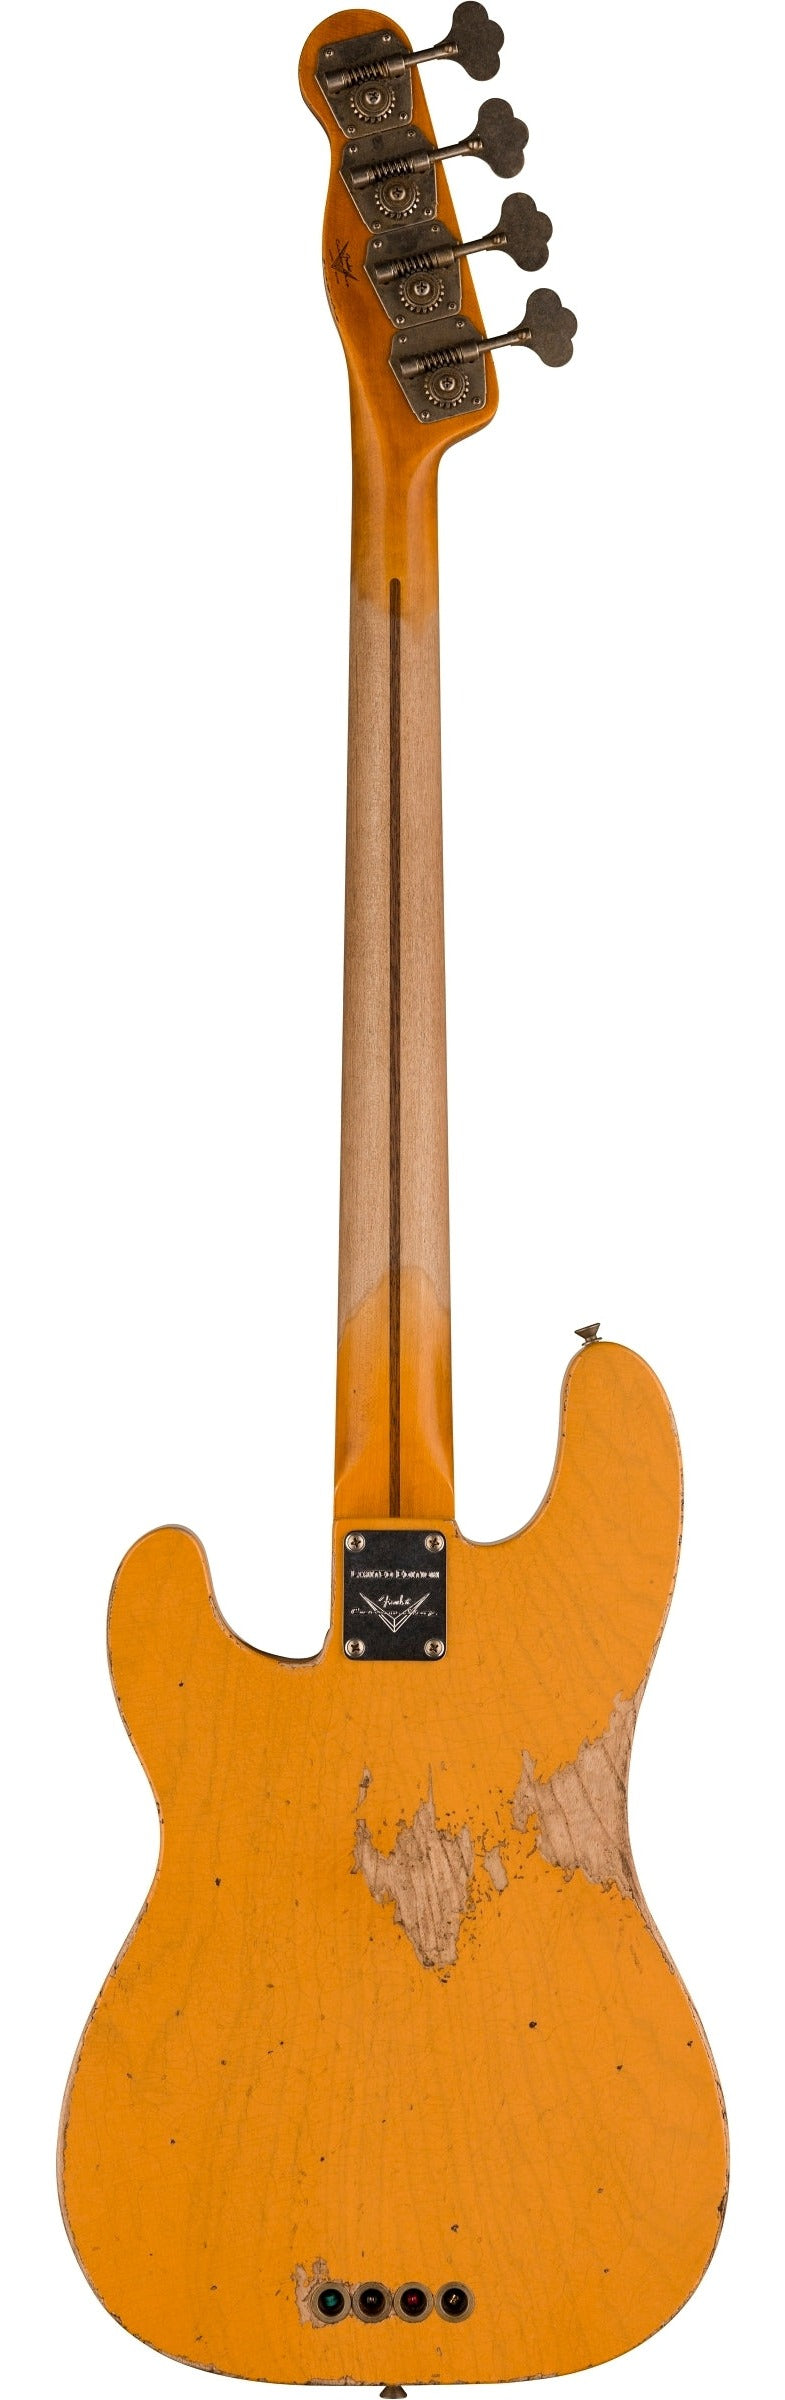 FENDER LIMITED EDITION '53 PRECISION BASS® - HEAVY RELIC®, AGED BUTTERSCOTCH BLONDE